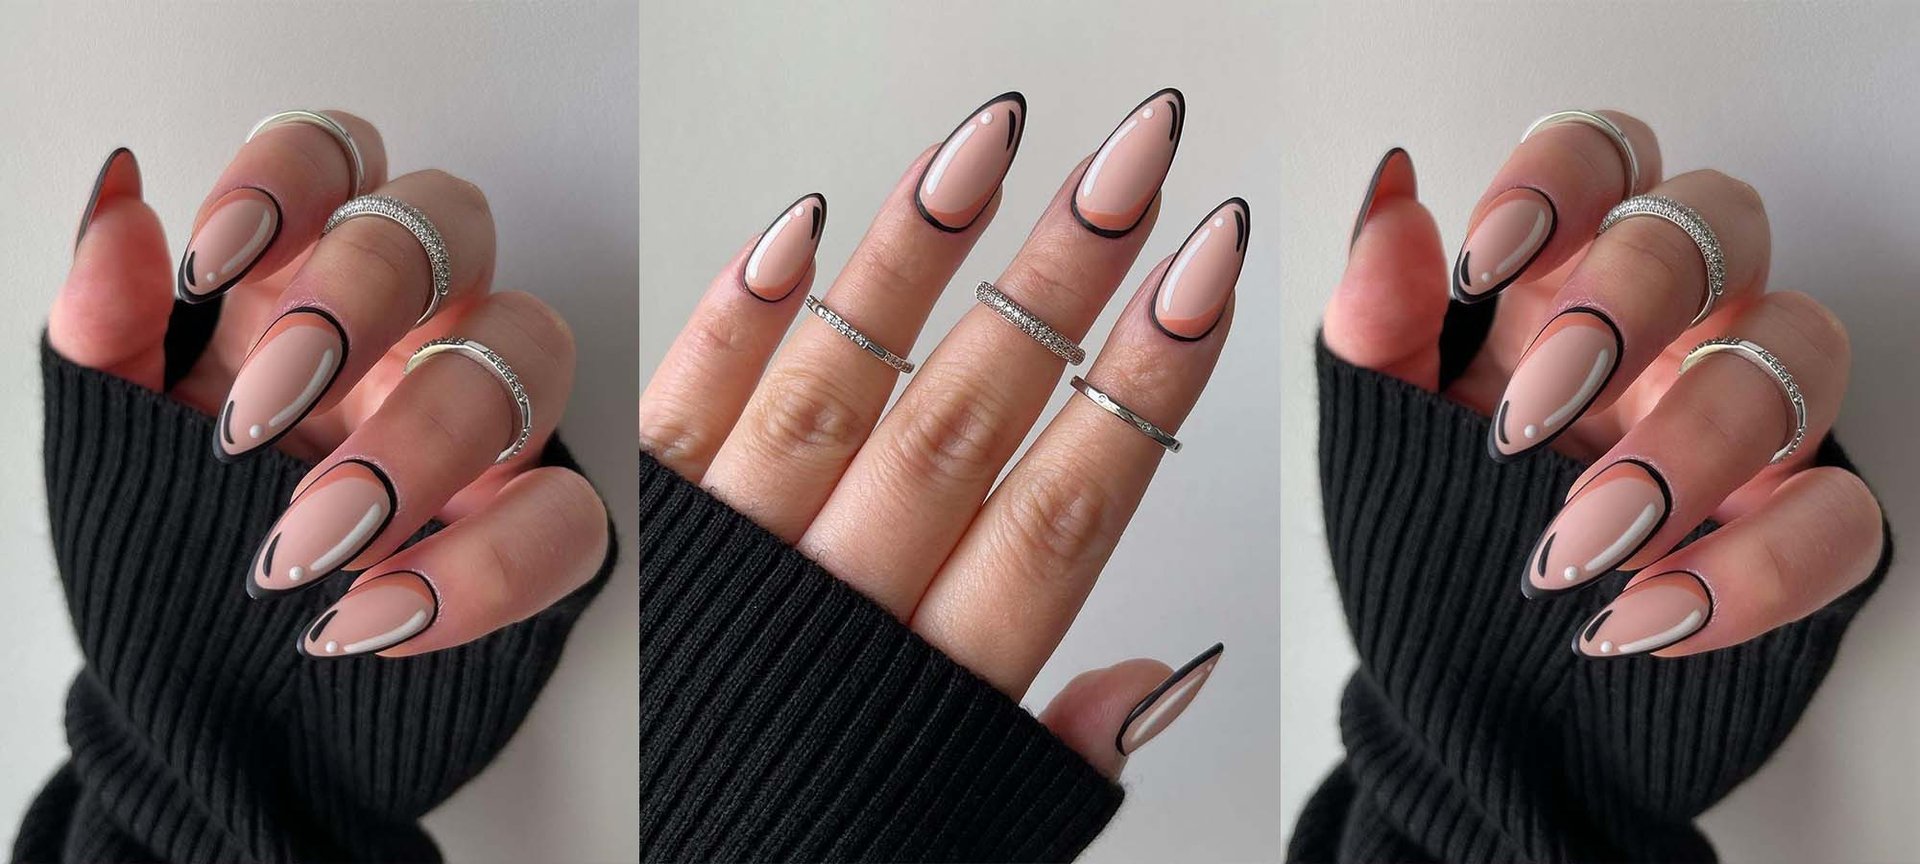 Acrylic Nail Ideas And Designs